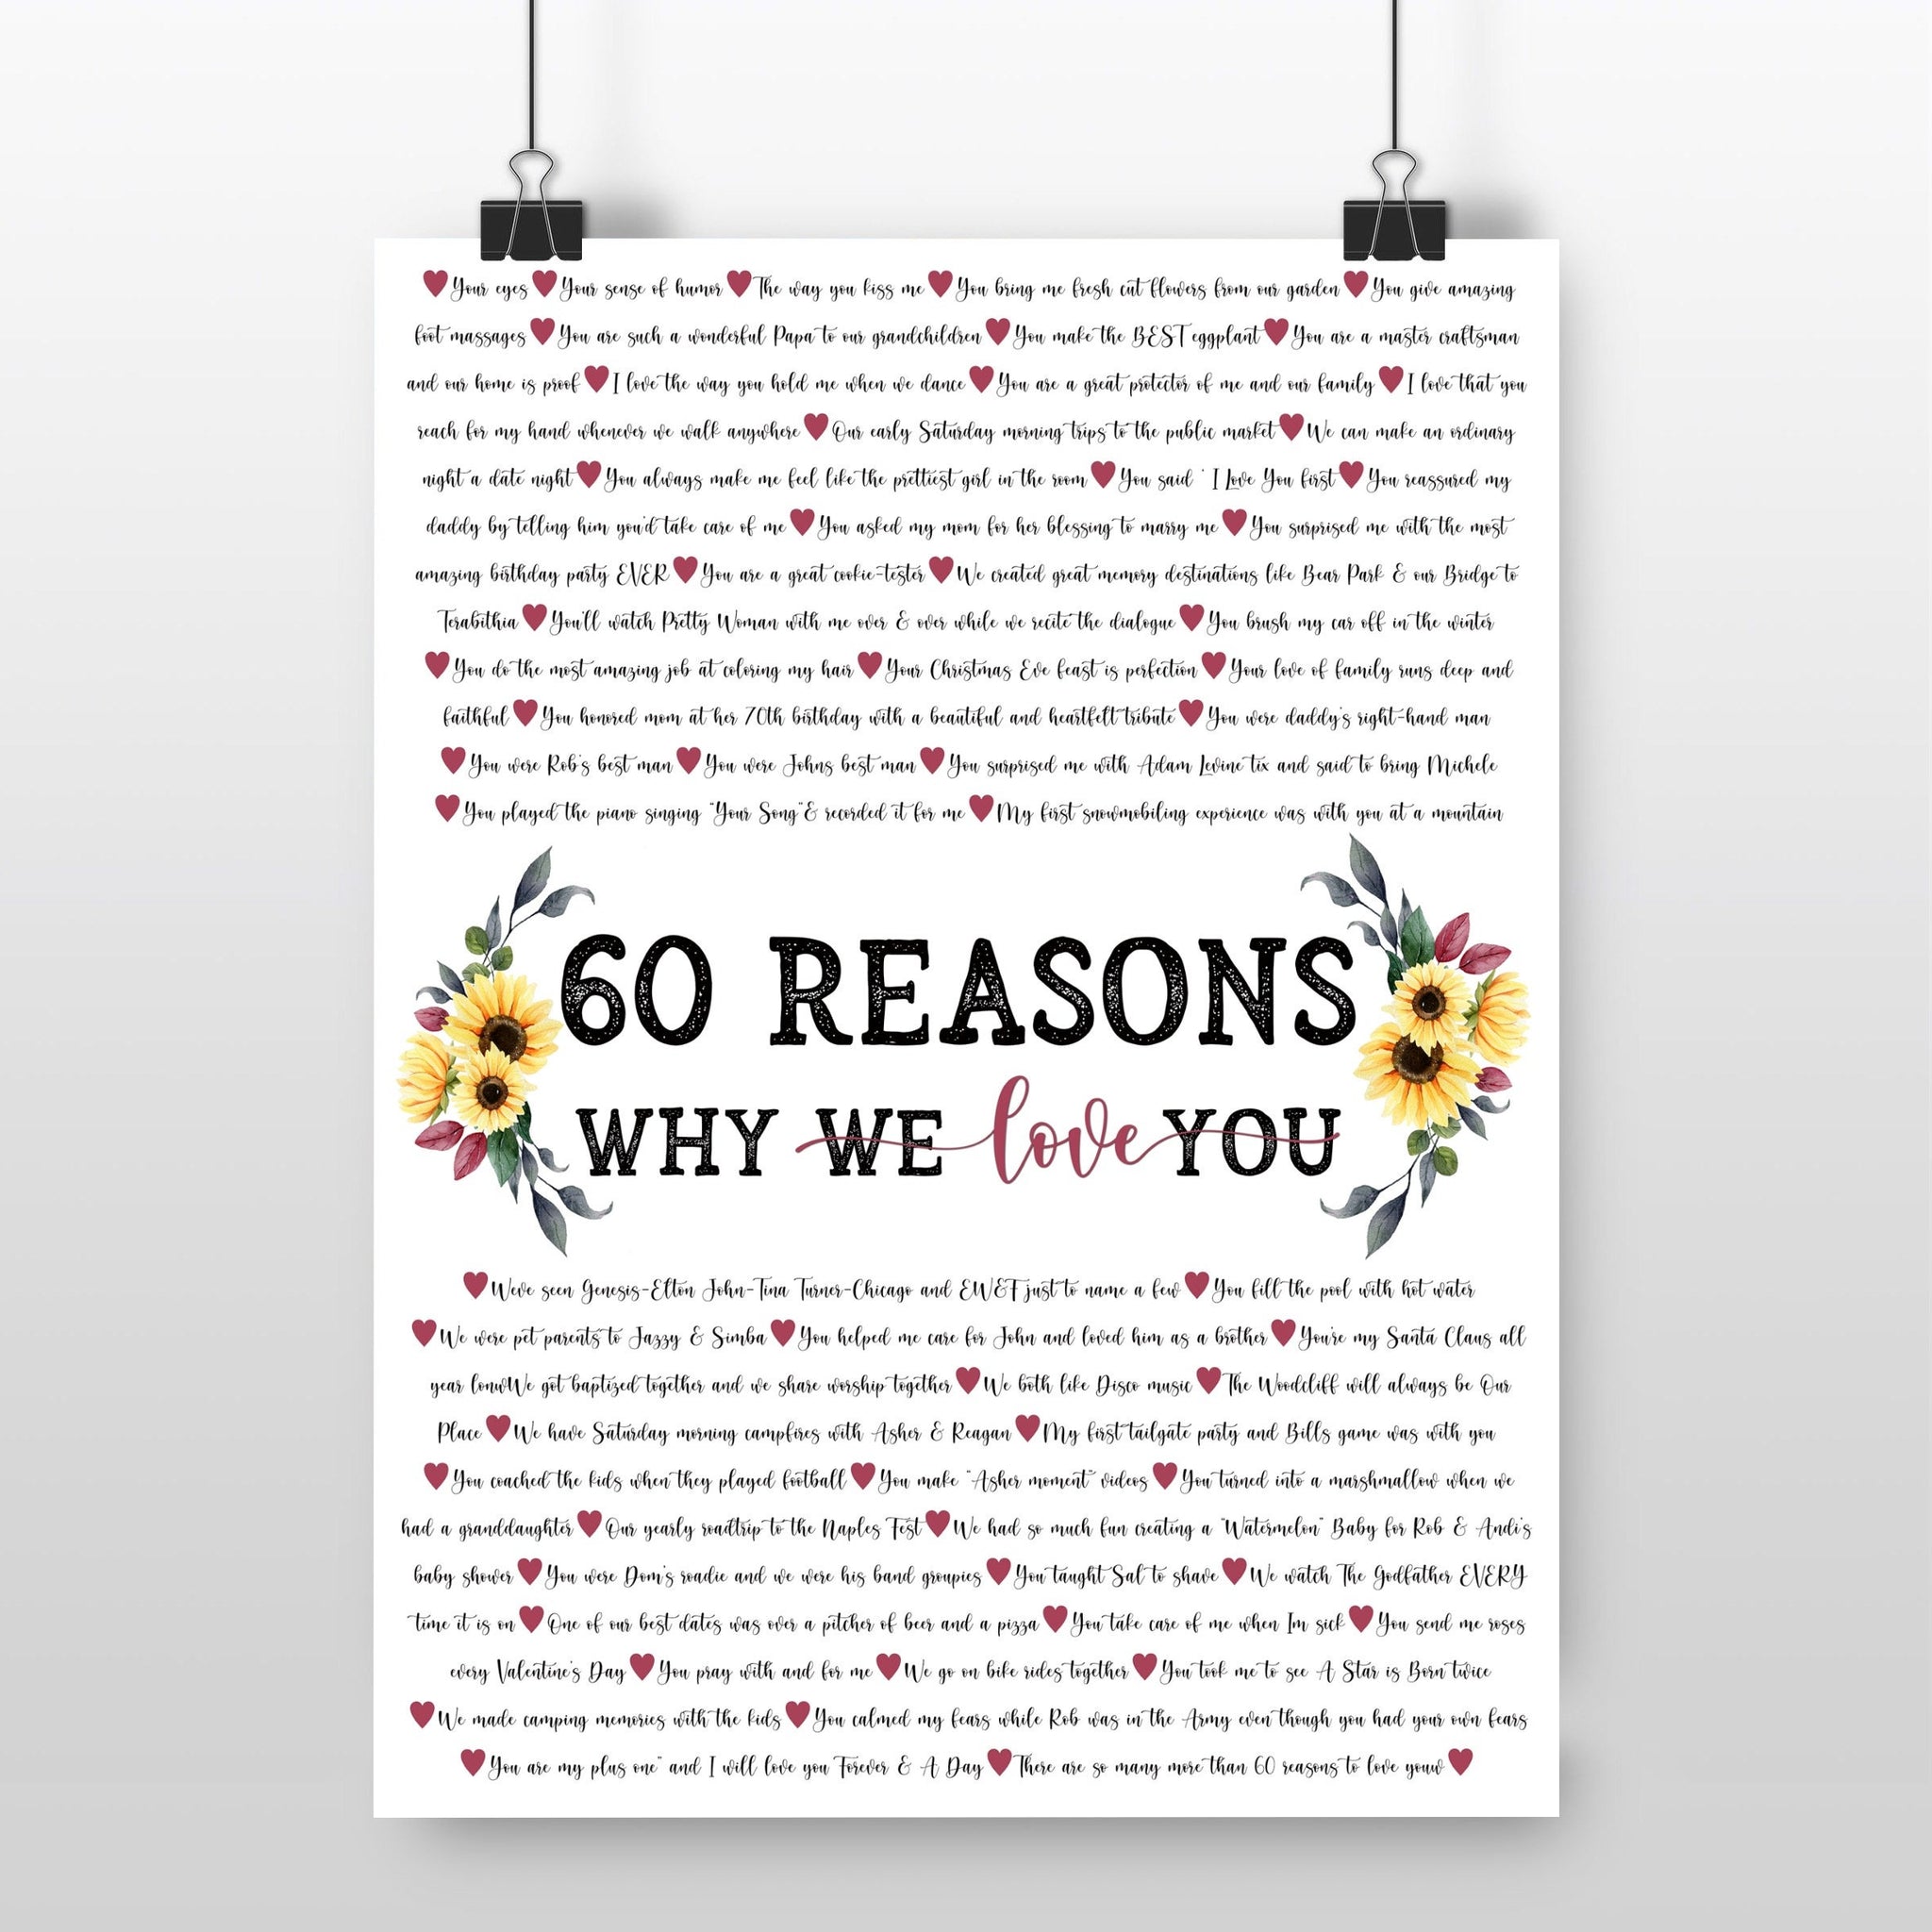 60 Reasons We Love You, Personalized 60th Birthday Gift Giclée